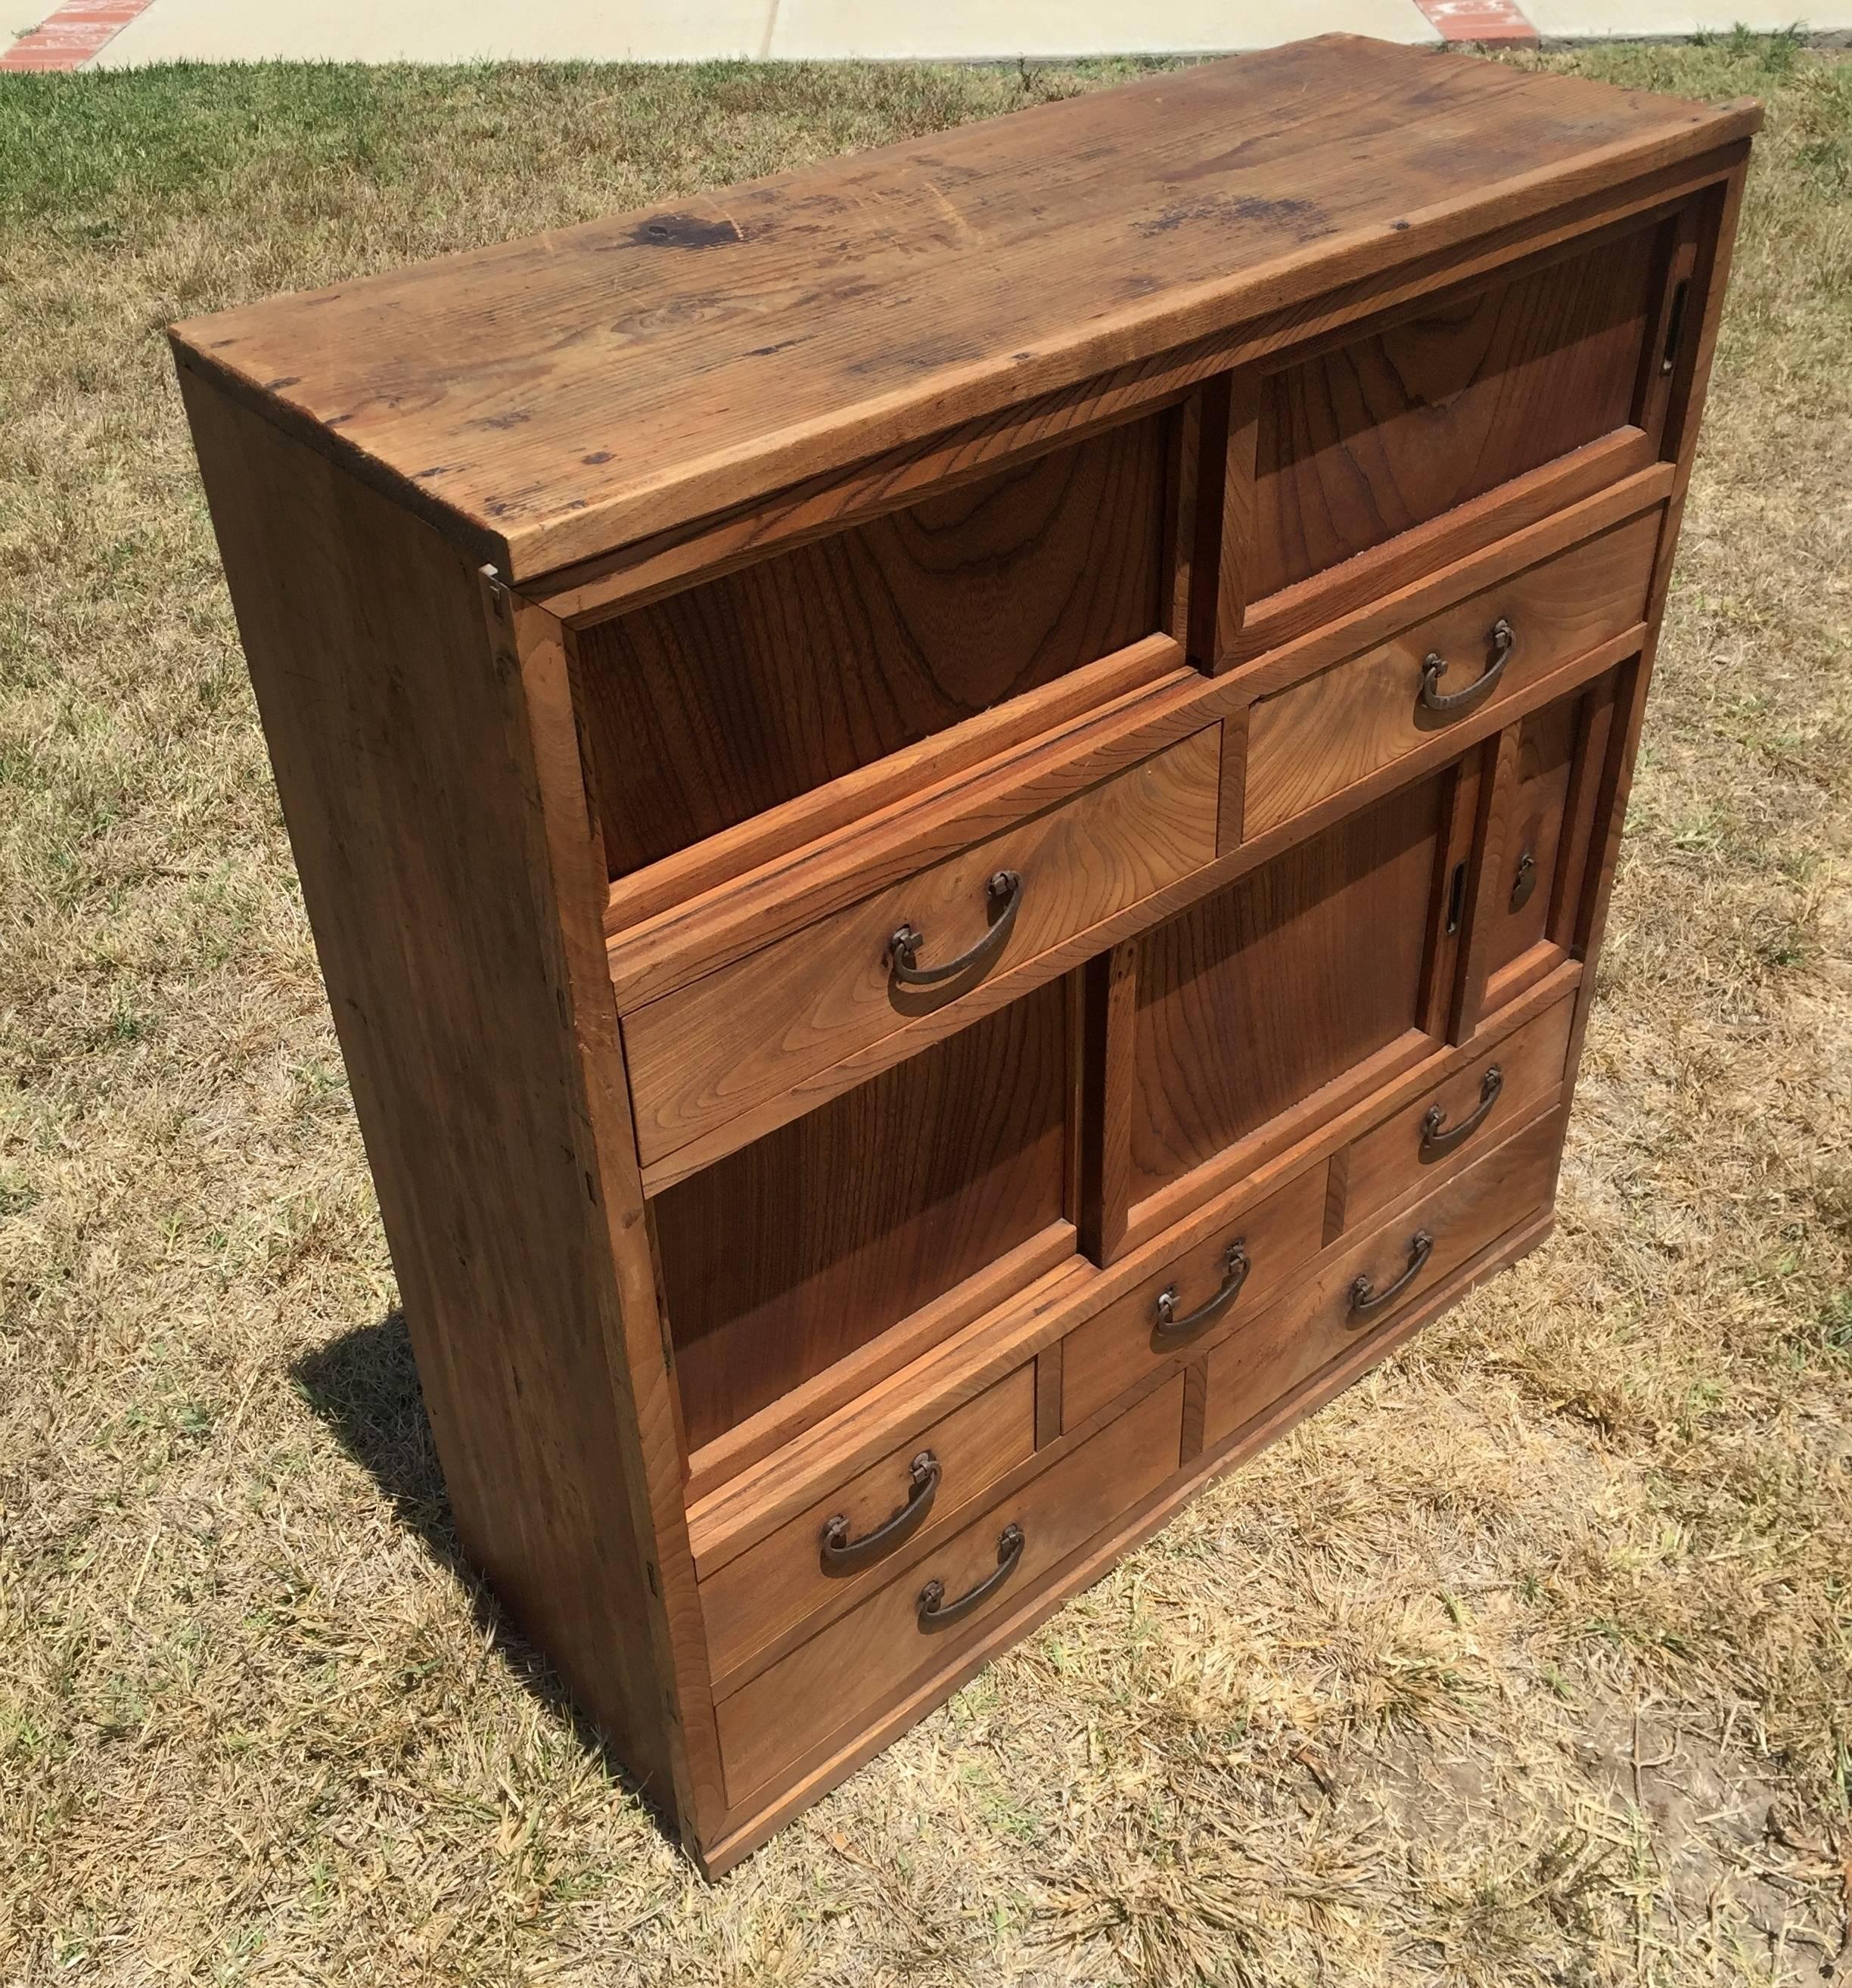 Beautiful Japanese Tansu chest features seven full length drawers and two sets of sliding doors. Solid elmwood have graceful swirling grains. All iron hardware original to the piece.

A great piece for any interior, especially a natural, rustic or